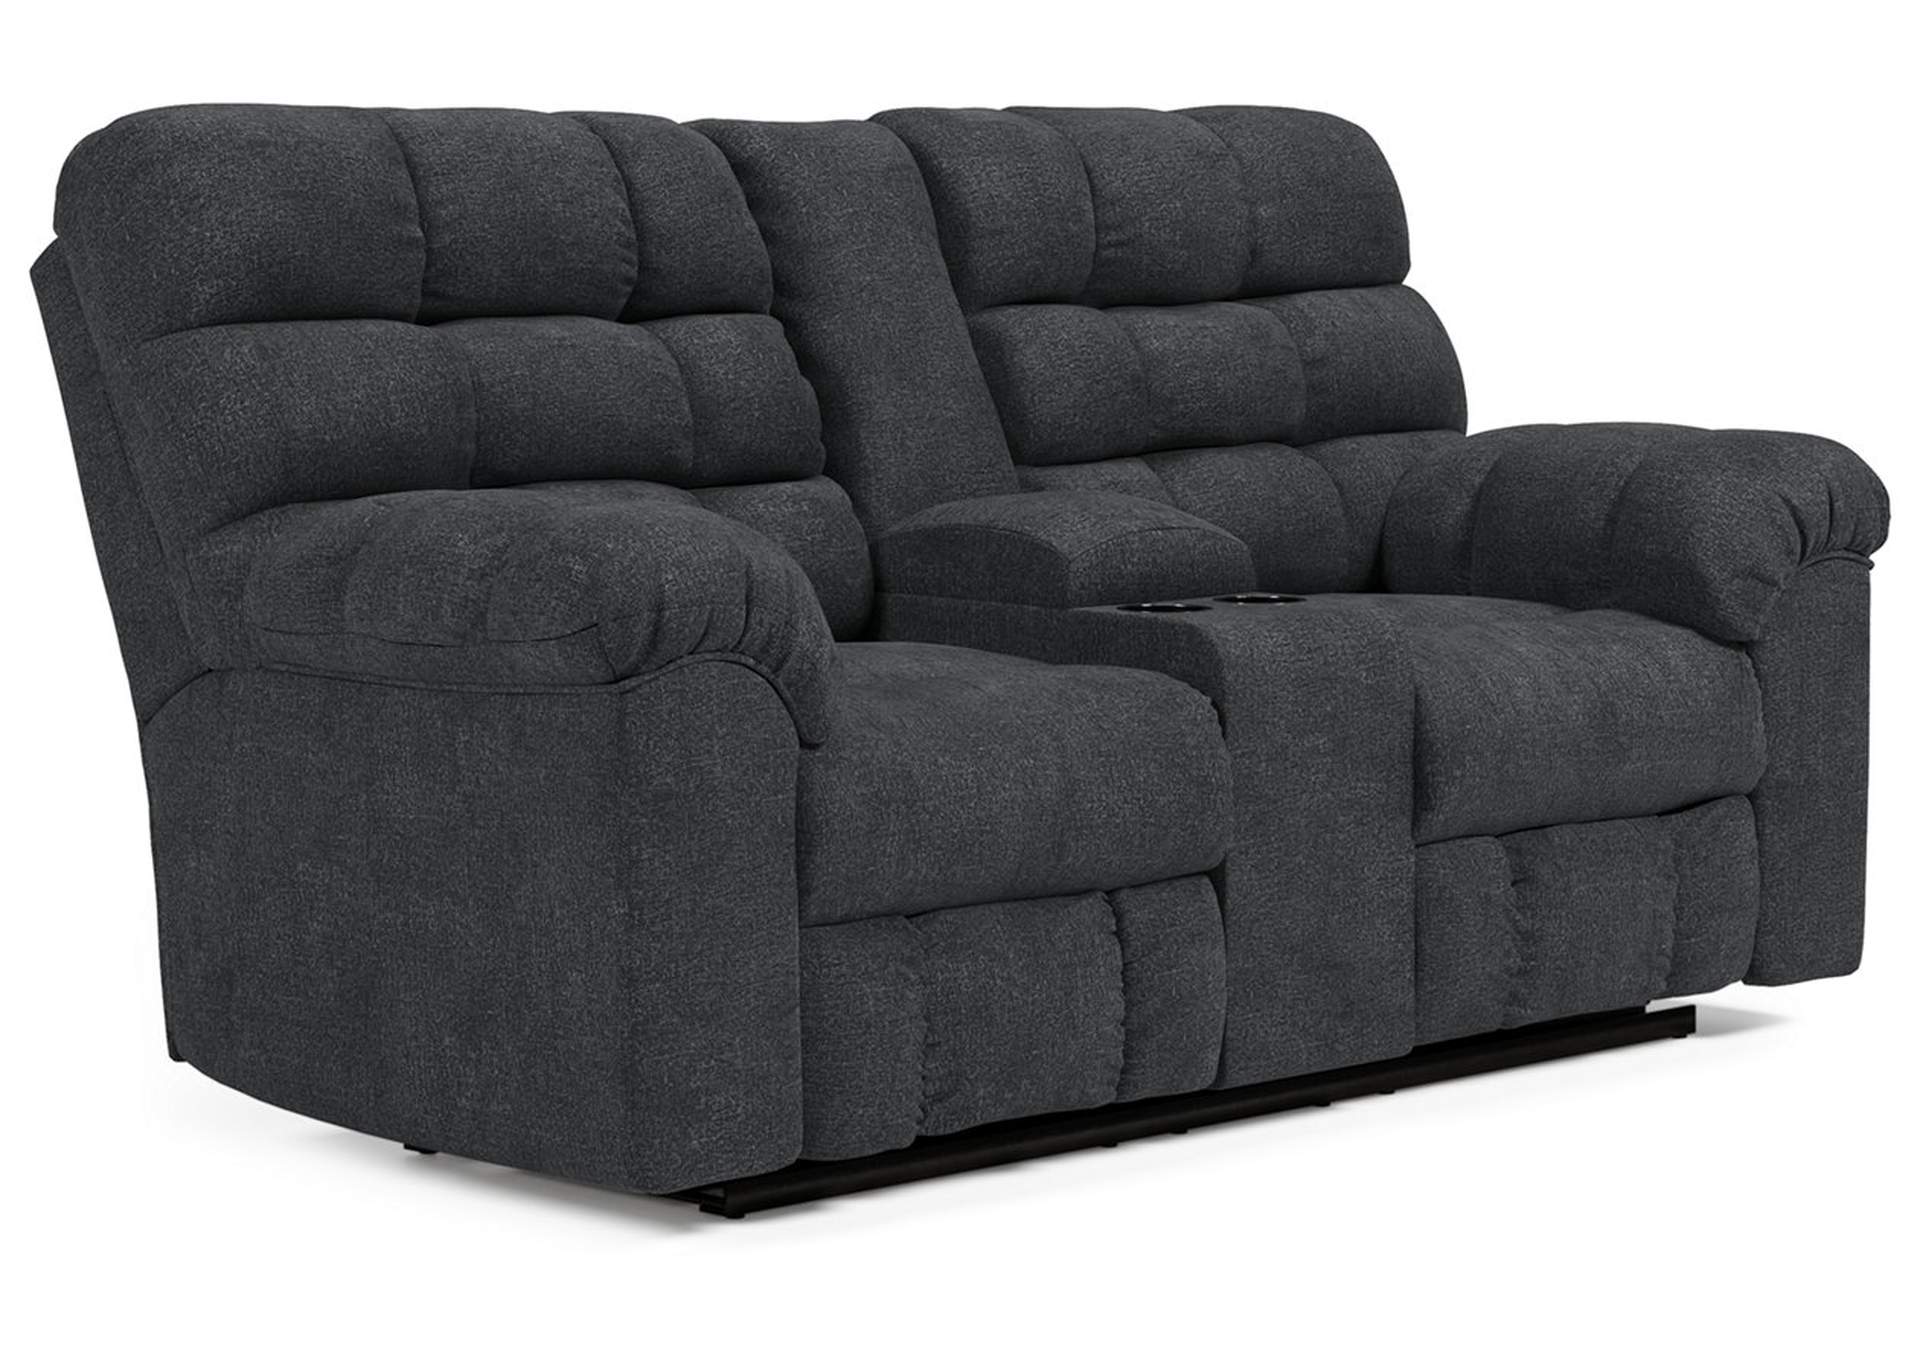 Wilhurst Reclining Sofa and Recliner,Signature Design By Ashley